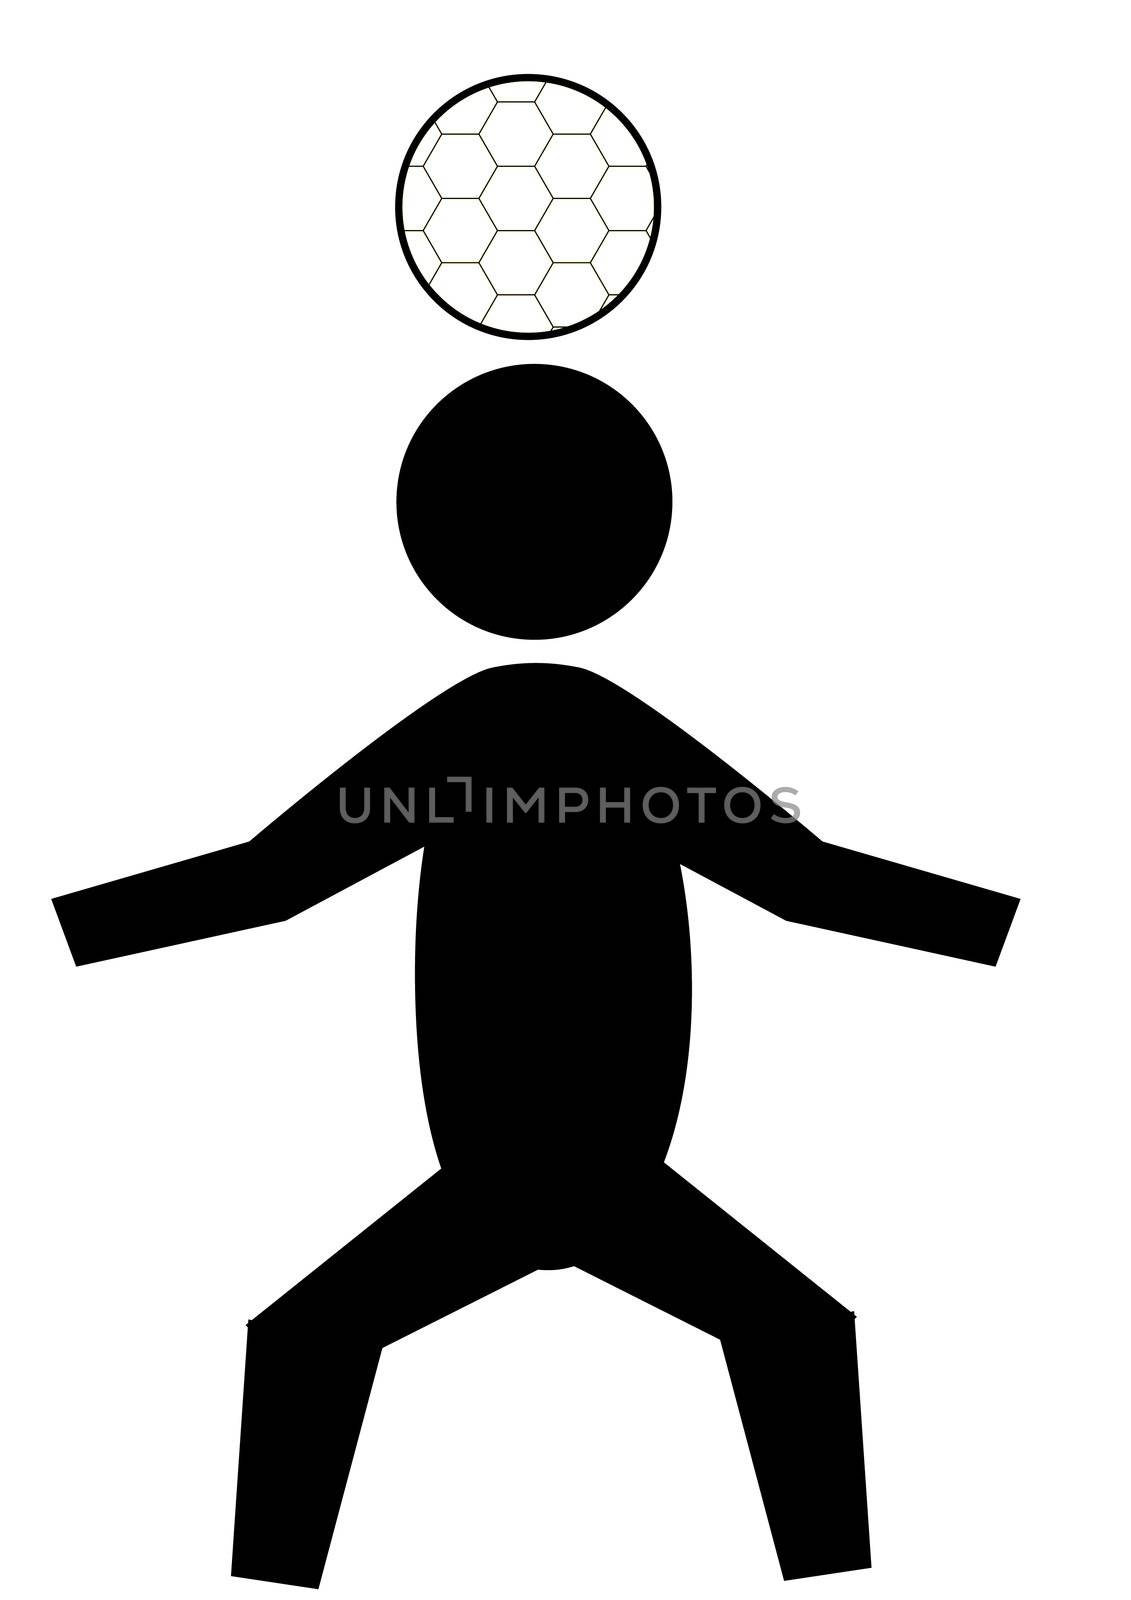 Soccer Player Bouncing Ball 1 by PhotoXite